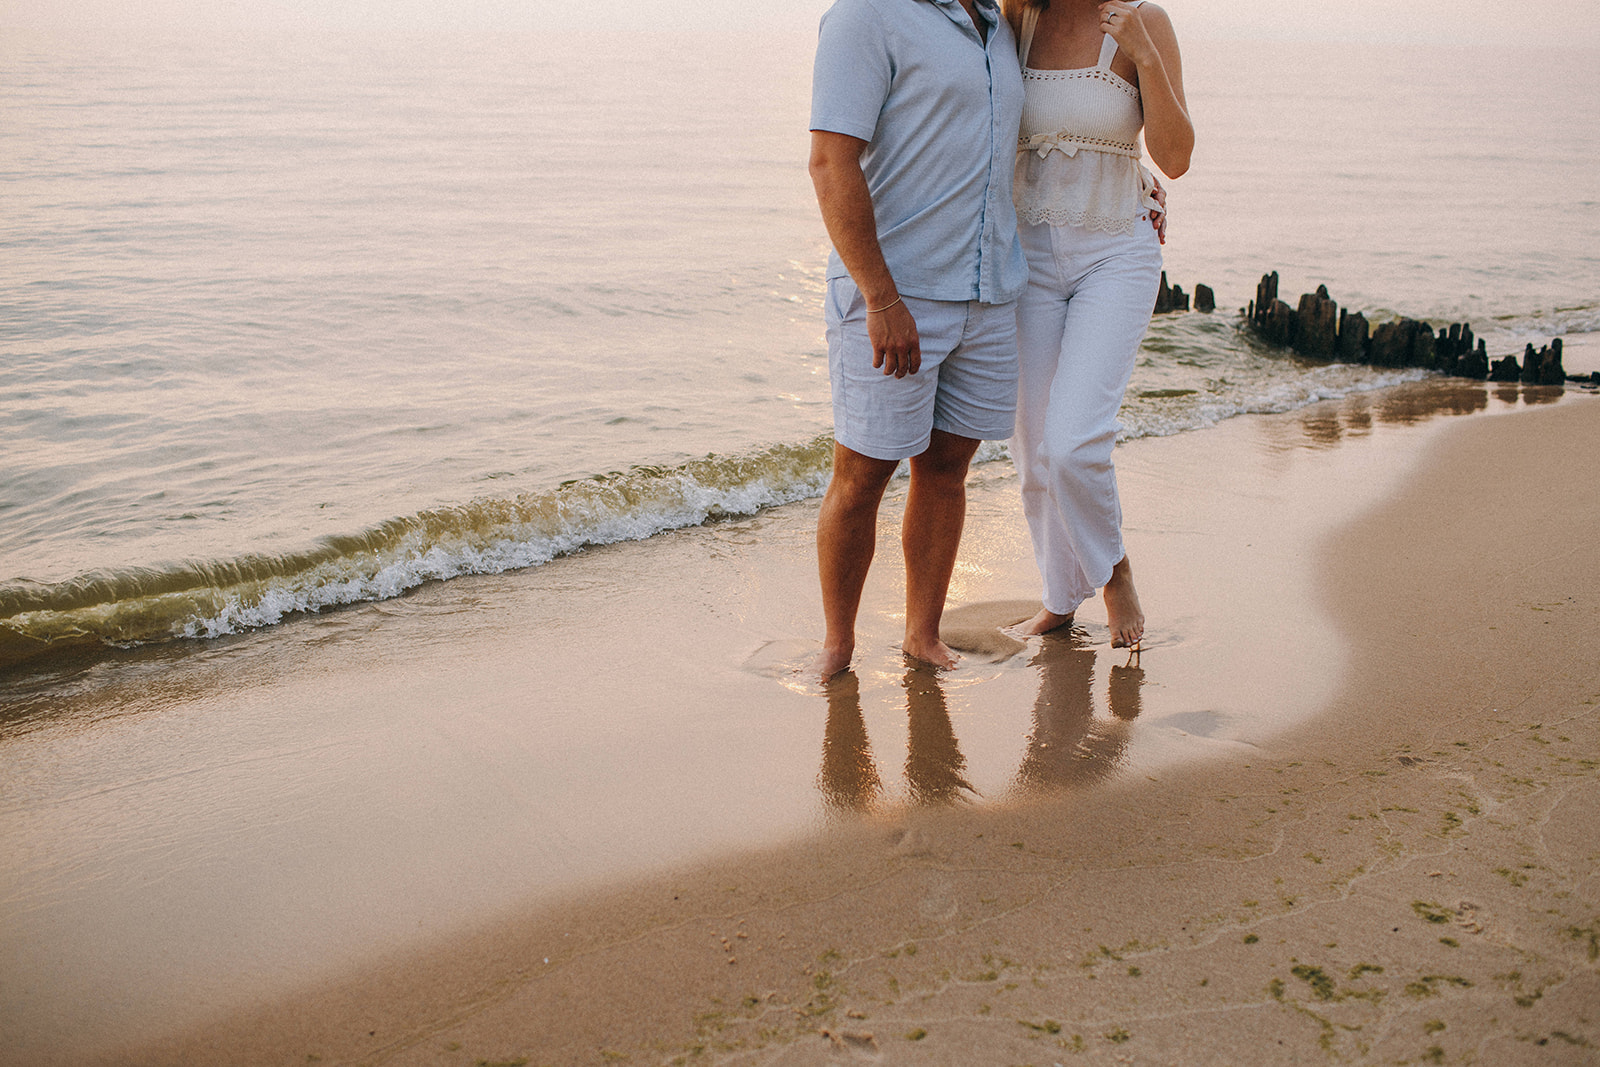 Fun and cute engagement photos at a private beach estate on Lake Michigan during a hazy red sunset